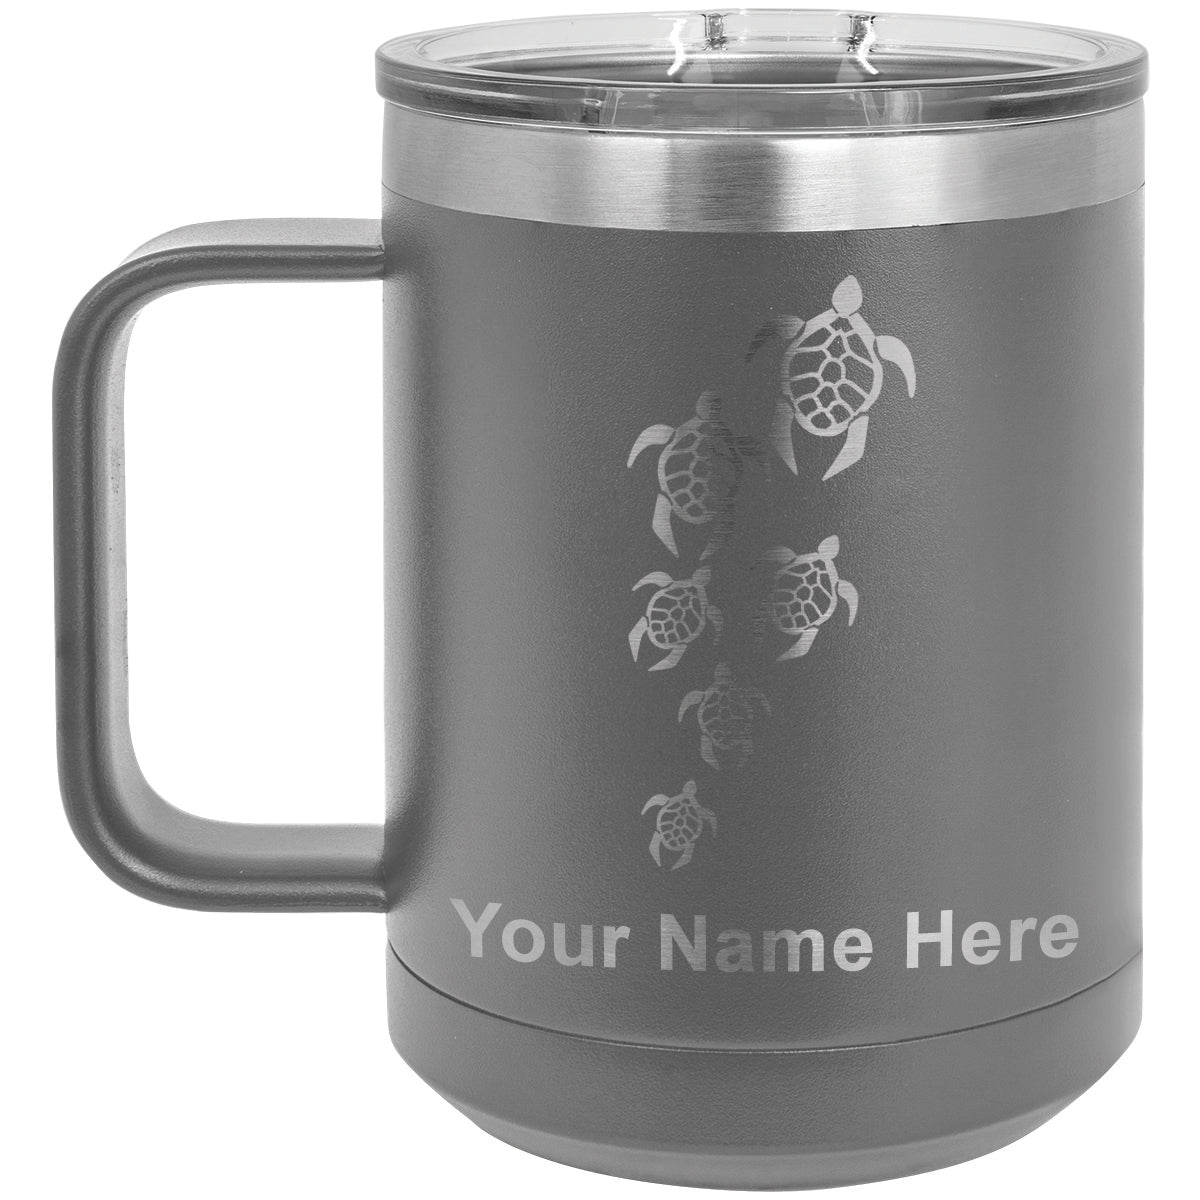 15oz Vacuum Insulated Coffee Mug, Sea Turtle Family, Personalized Engraving Included